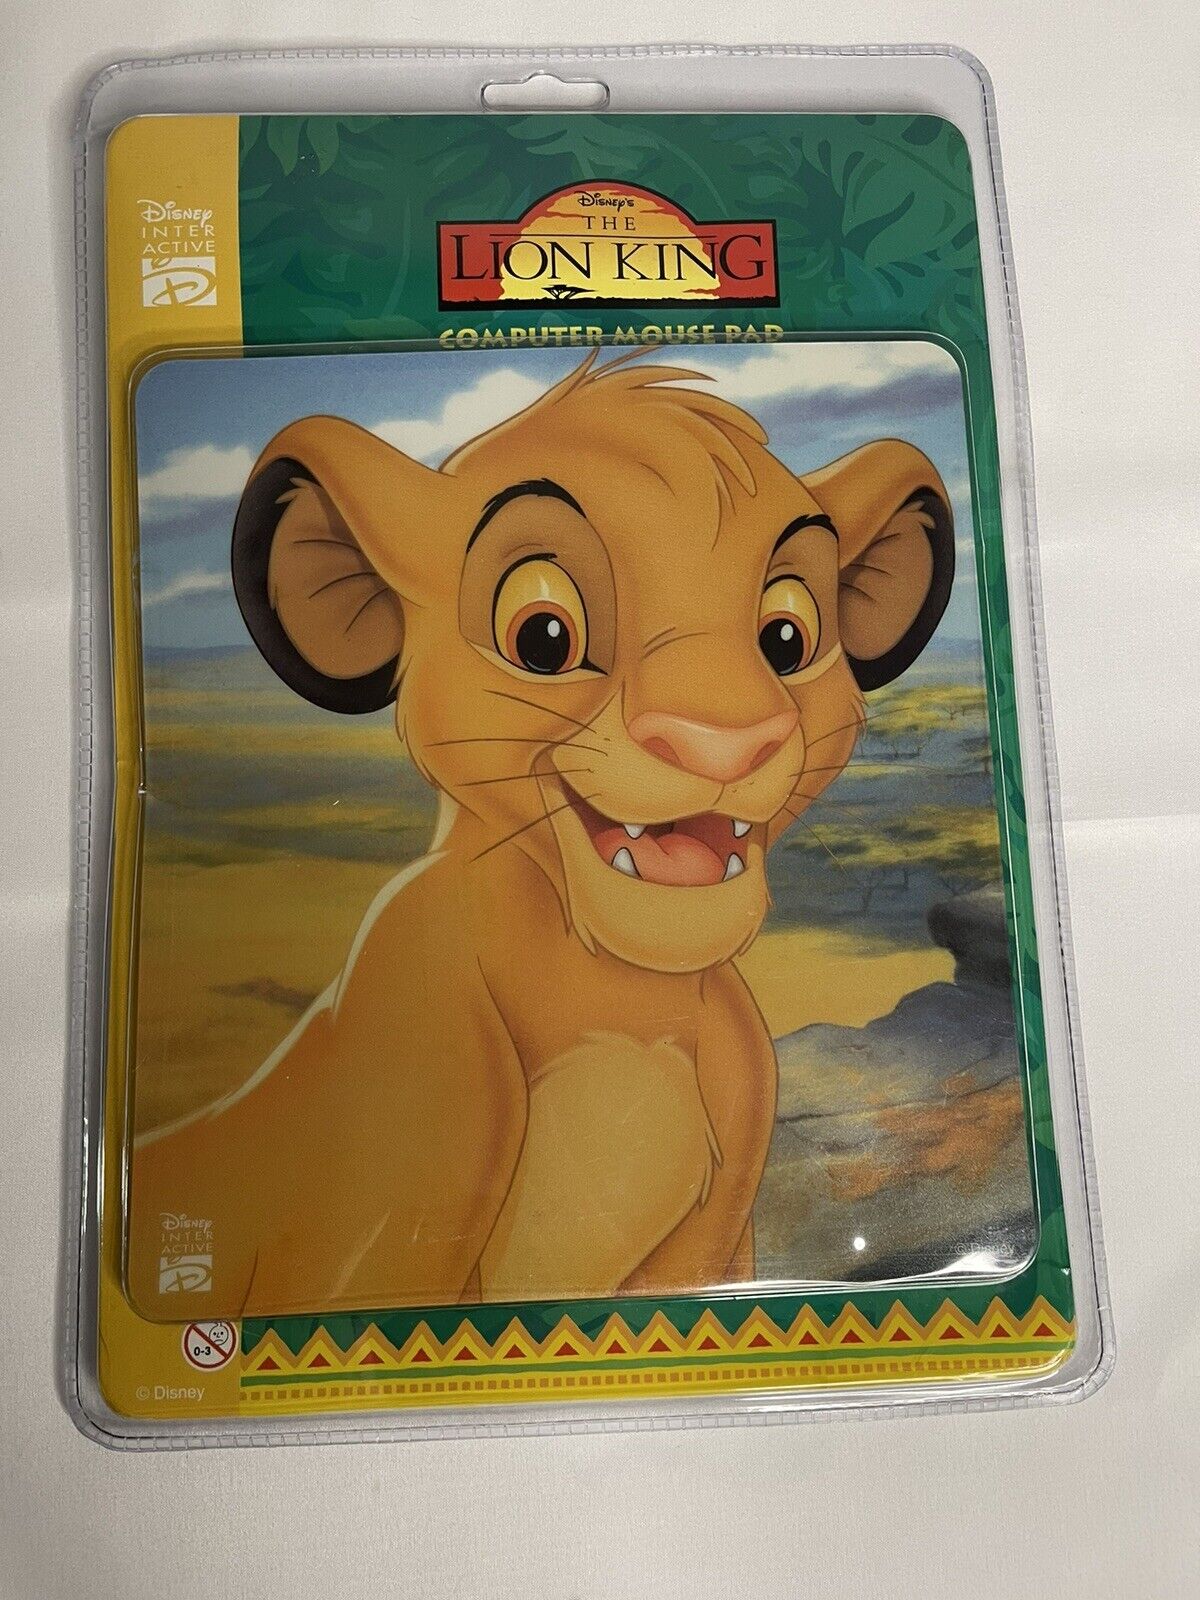 Disney Lion King (Simba) Computer Mouse Pad | New VTG 90s | Officially Licensed